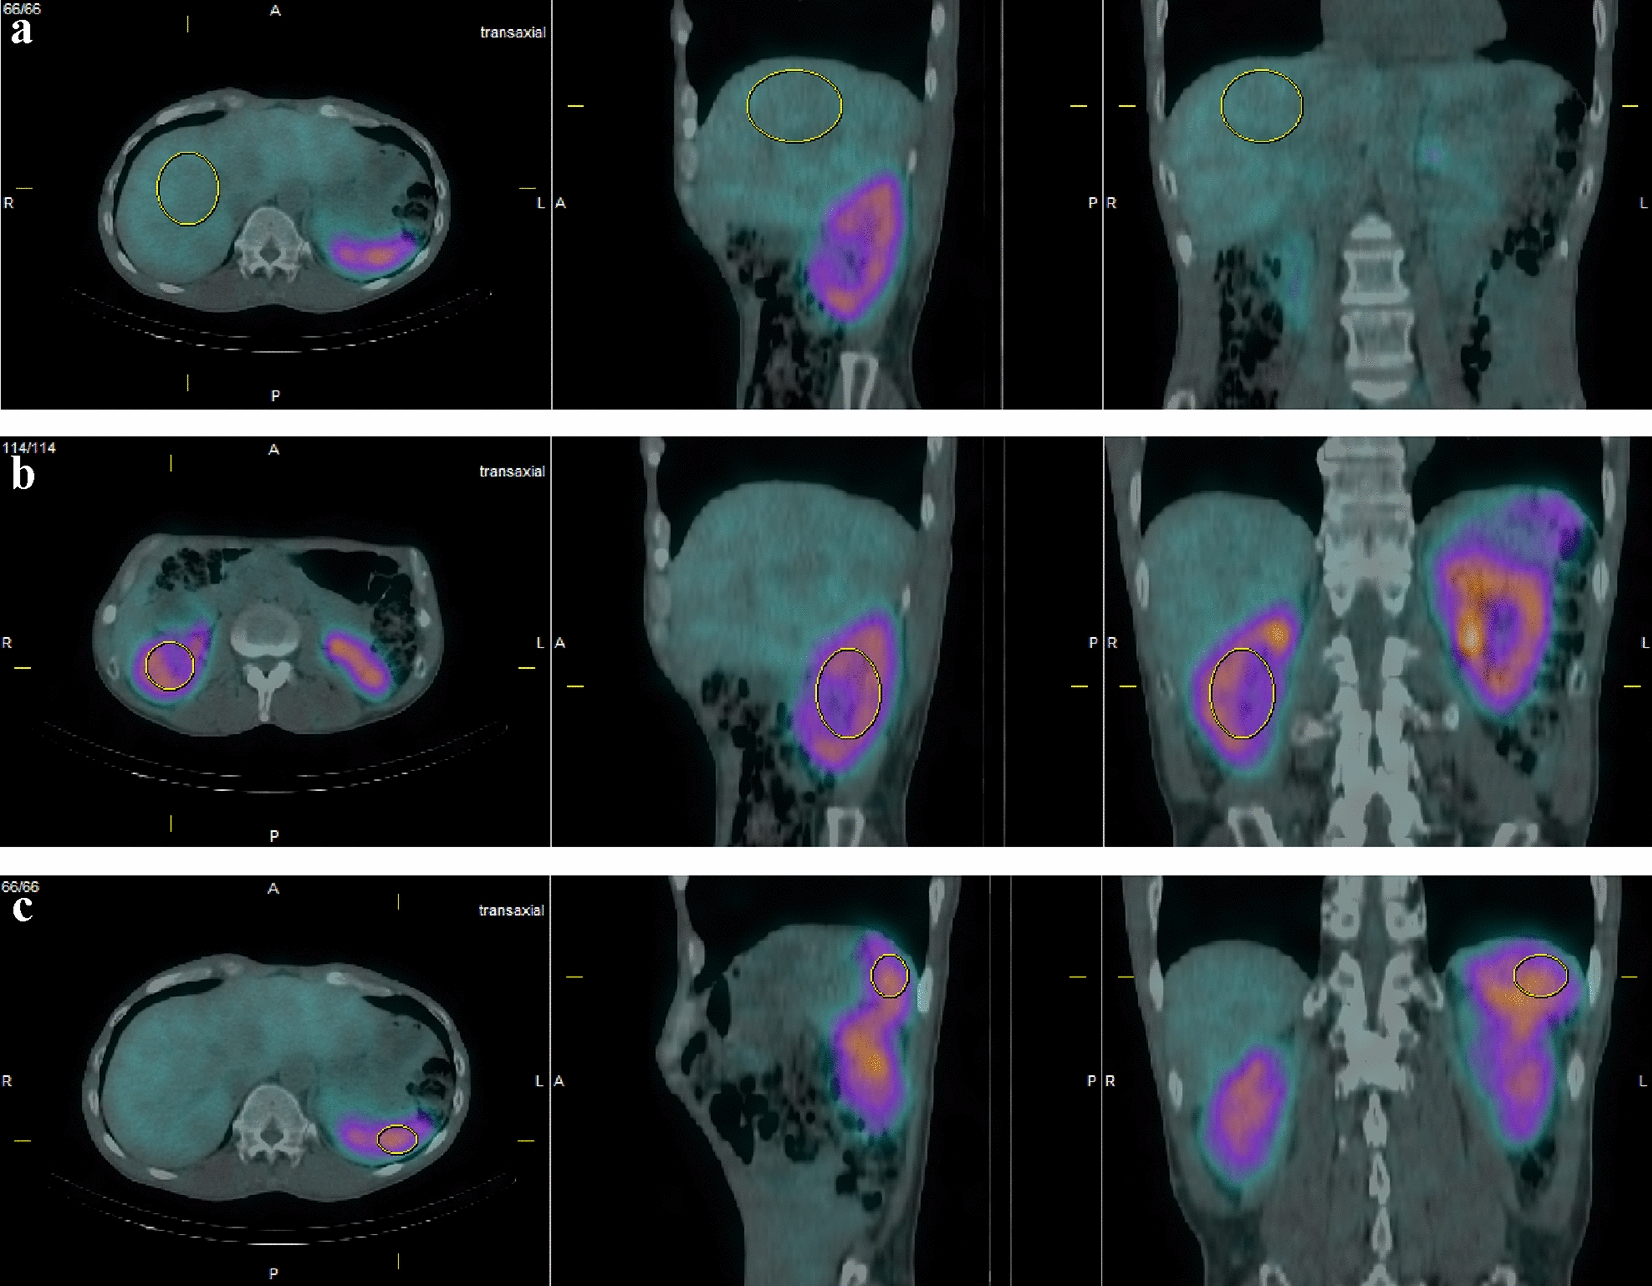 Combined visual and quantitative assessment of somatostatin receptor scintigraphy for staging and restaging of neuroendocrine tumors